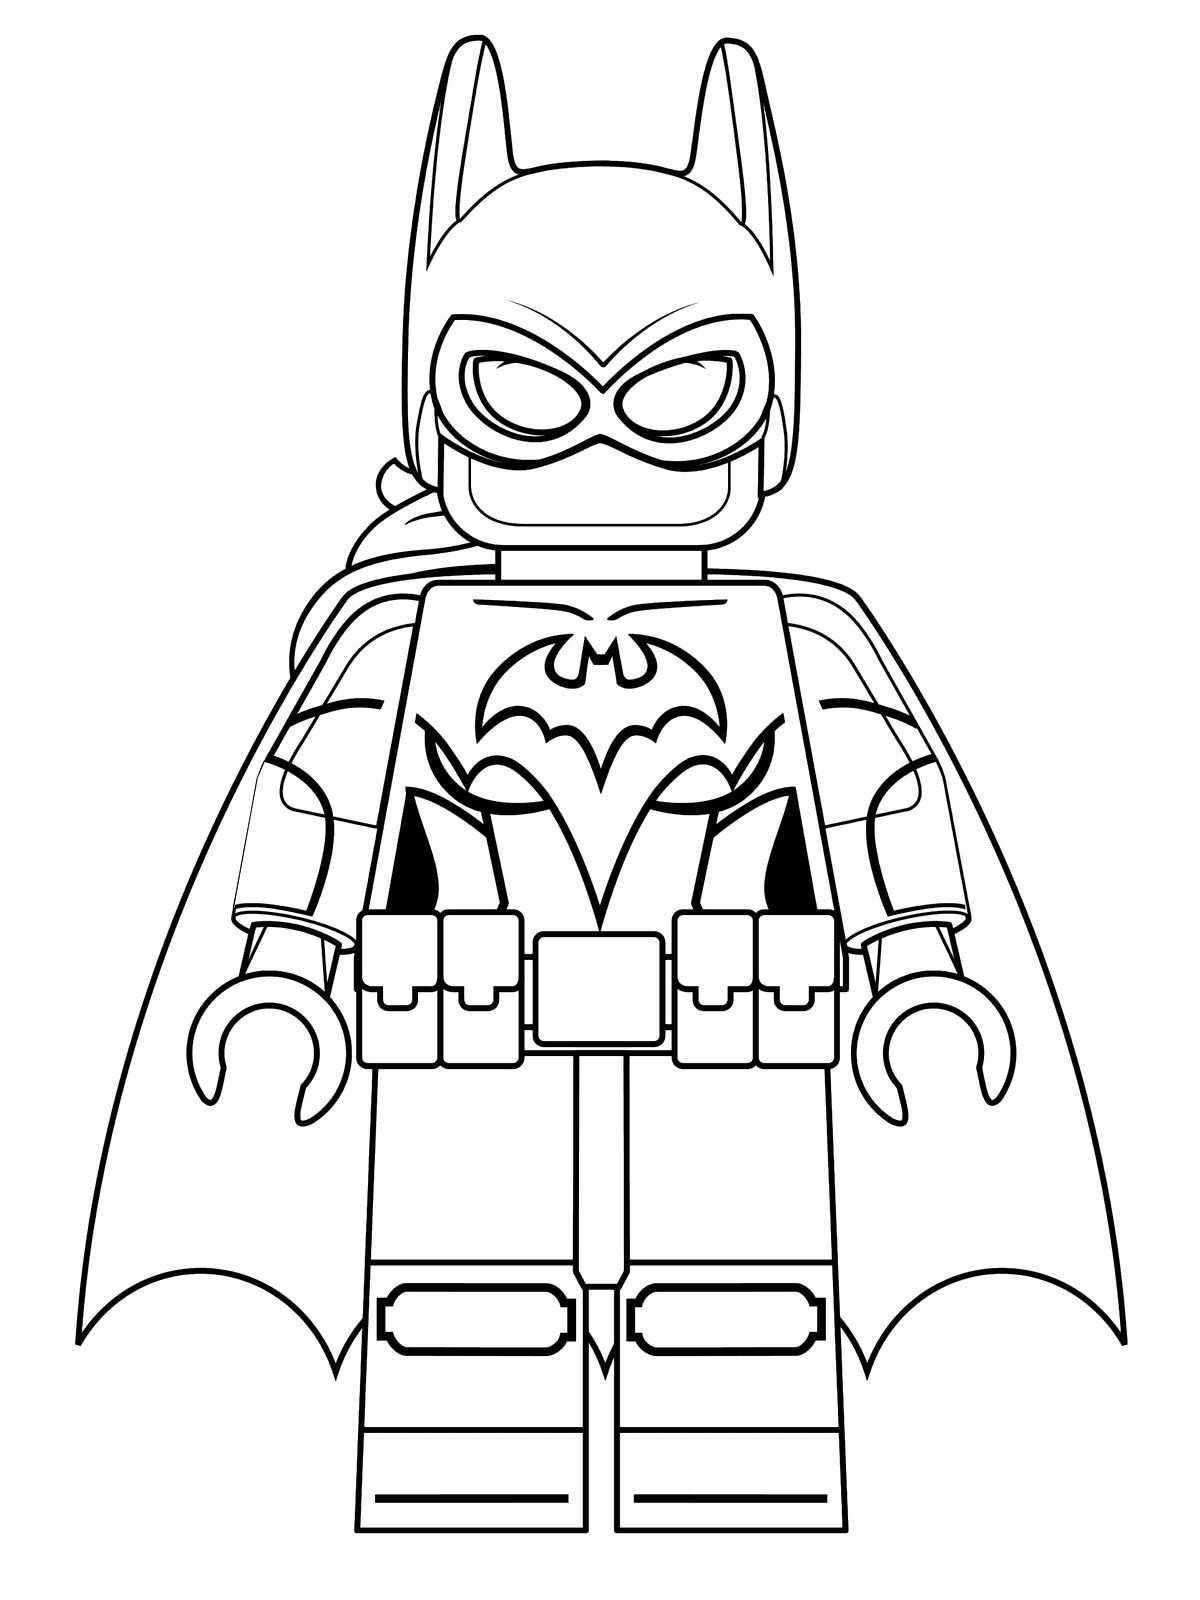 Colorful lego flash coloring page